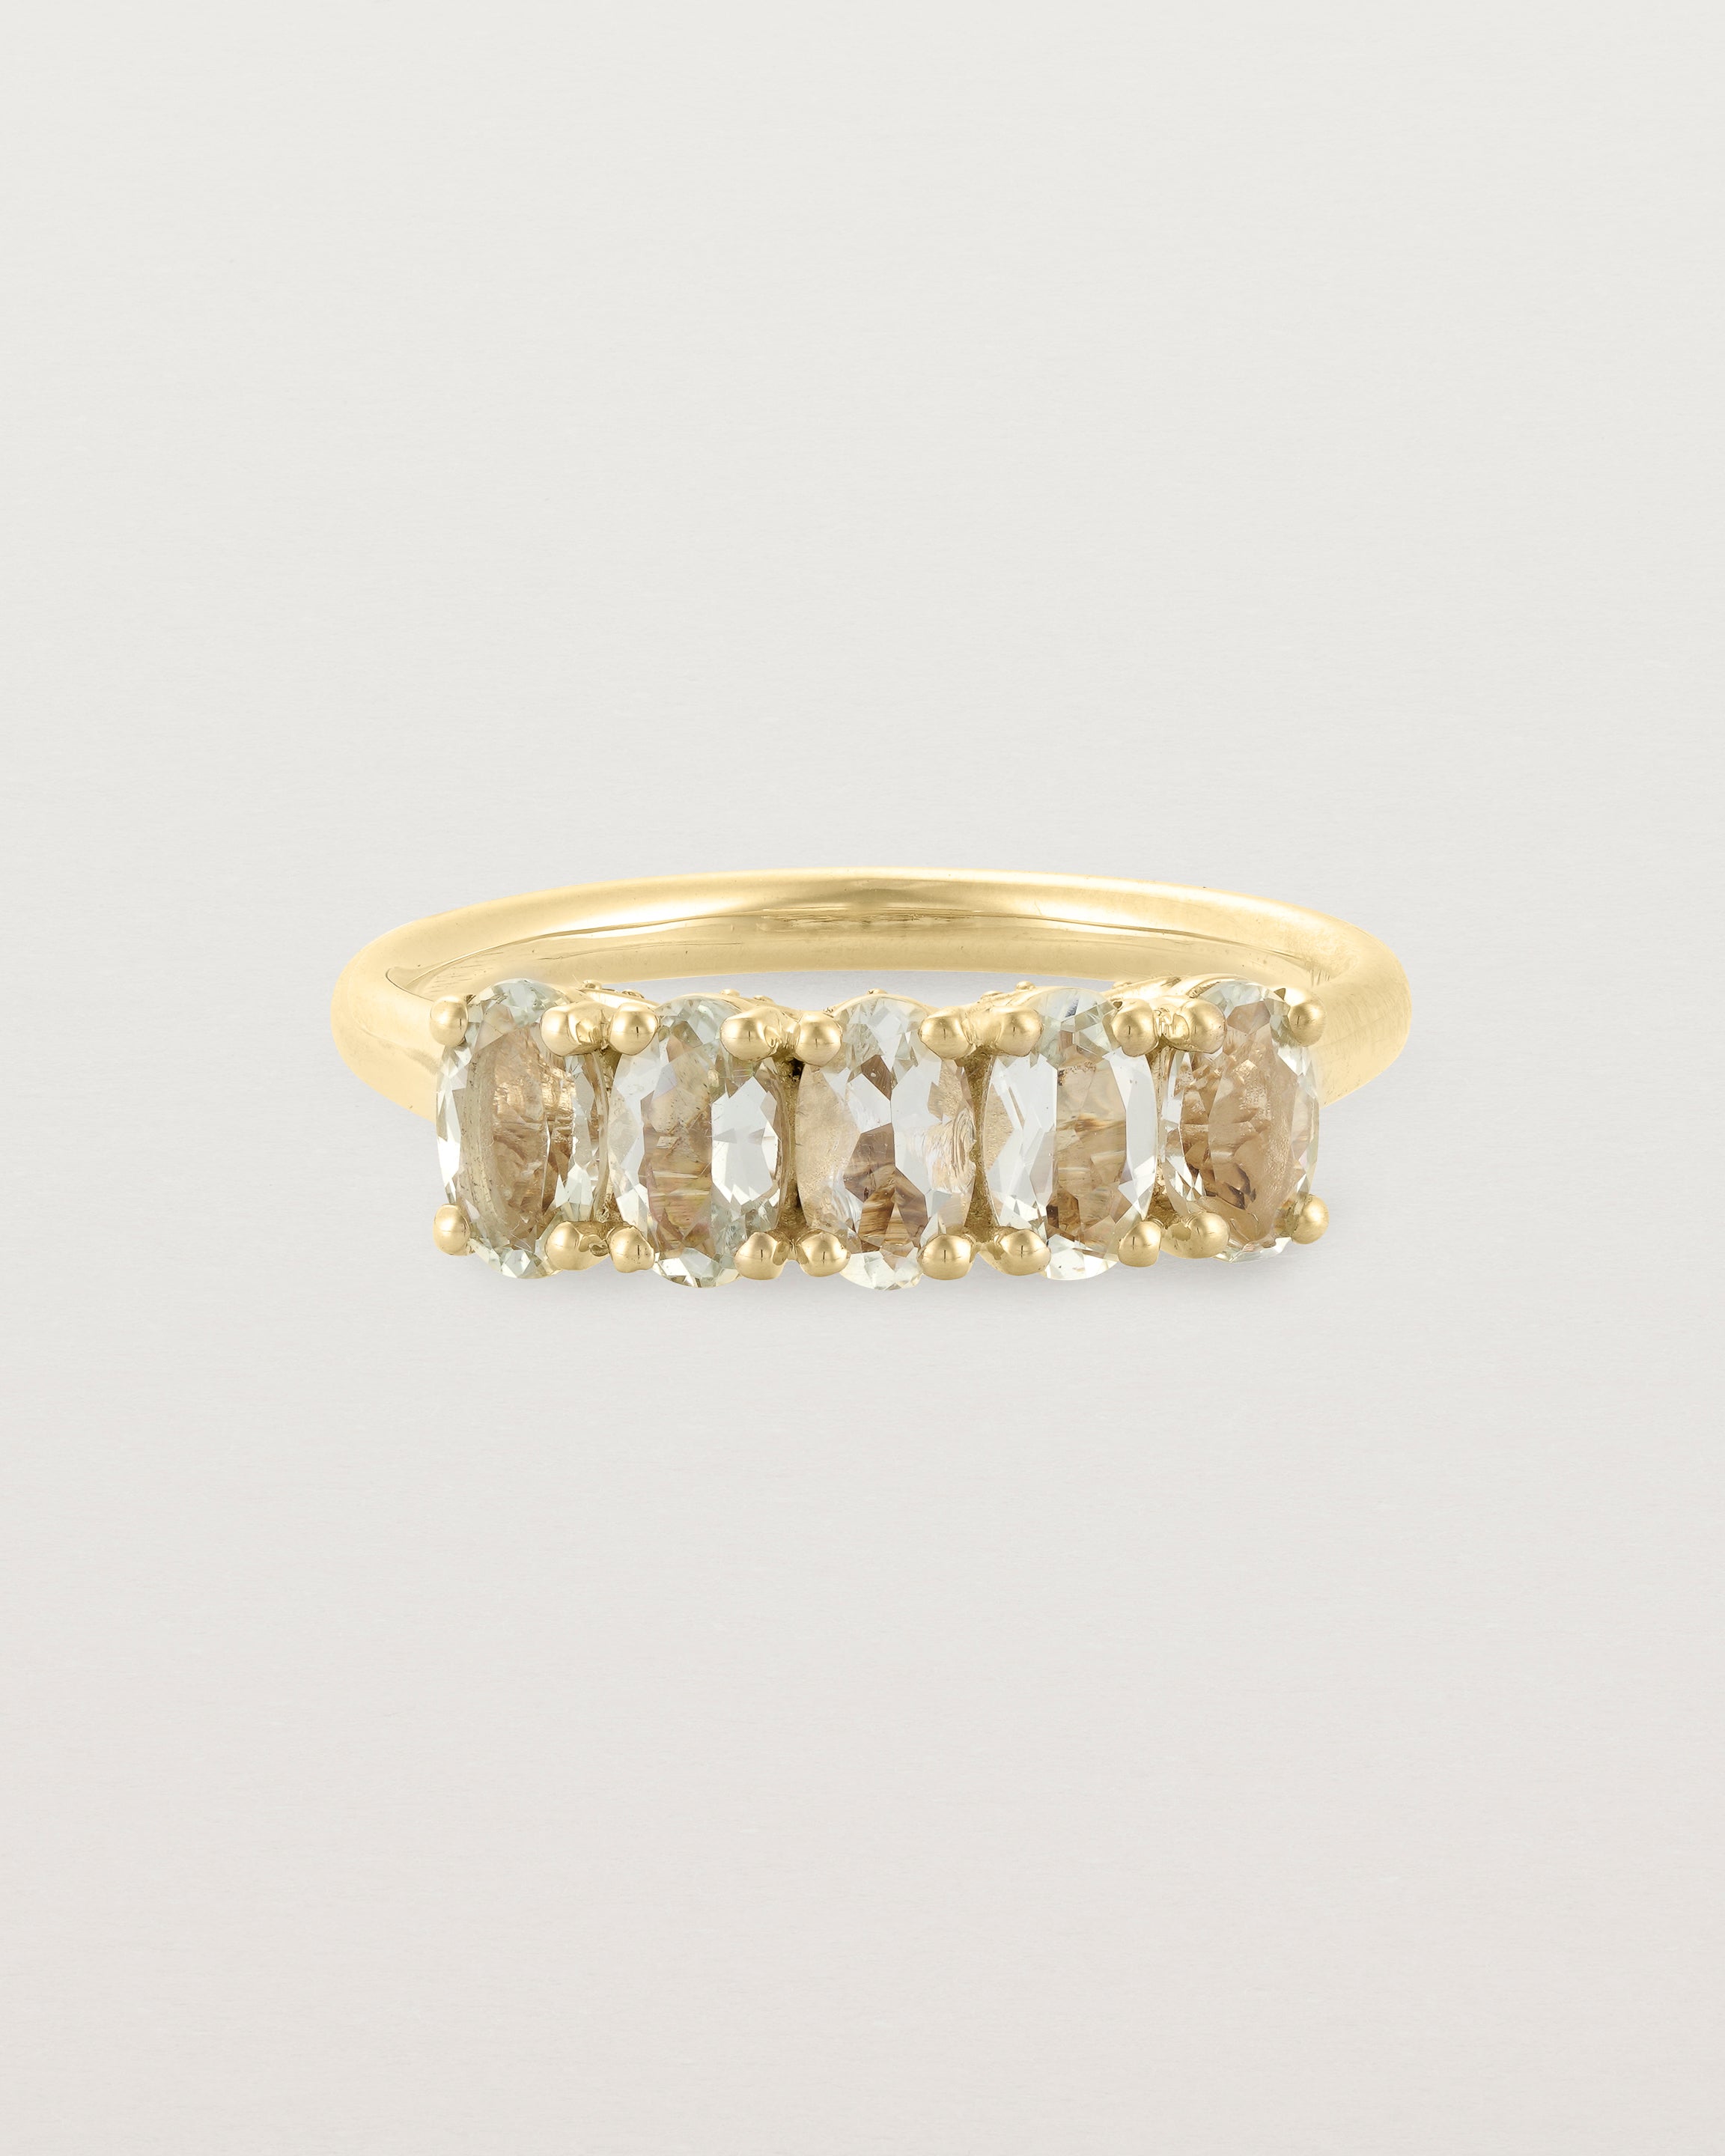 Front view of the Fiore Wrap Ring | Green Amethyst | Yellow Gold.